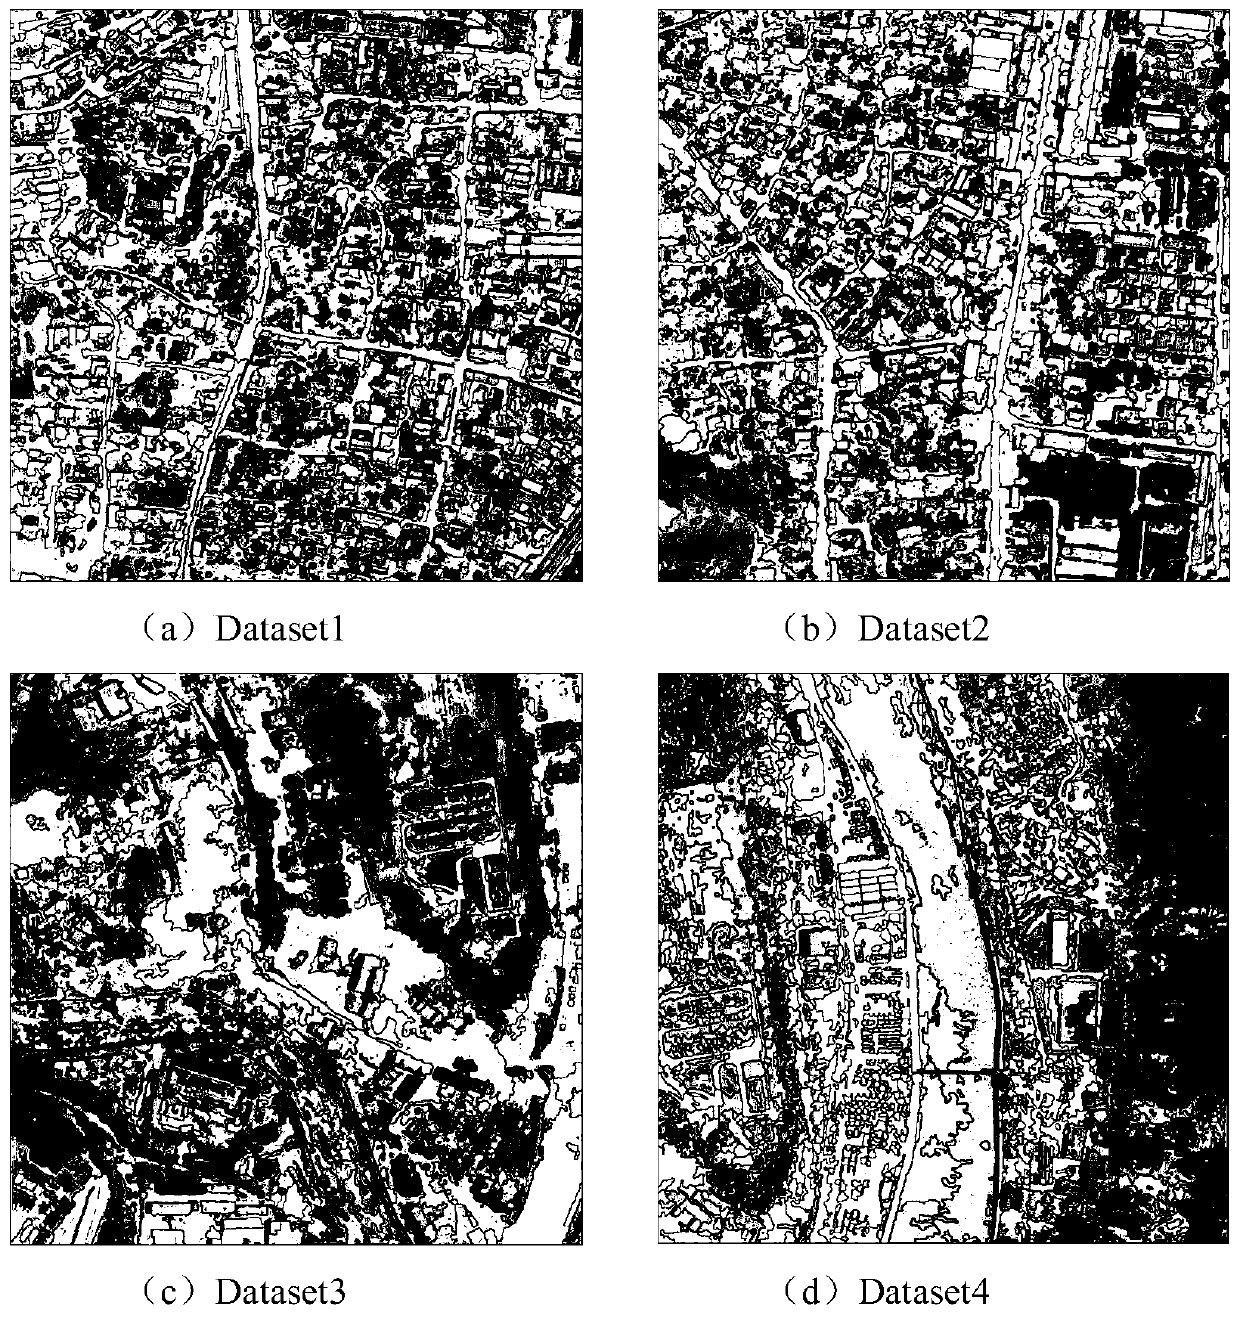 Remote sensing image earthquake damage building identification method based on decision tree and feature optimization